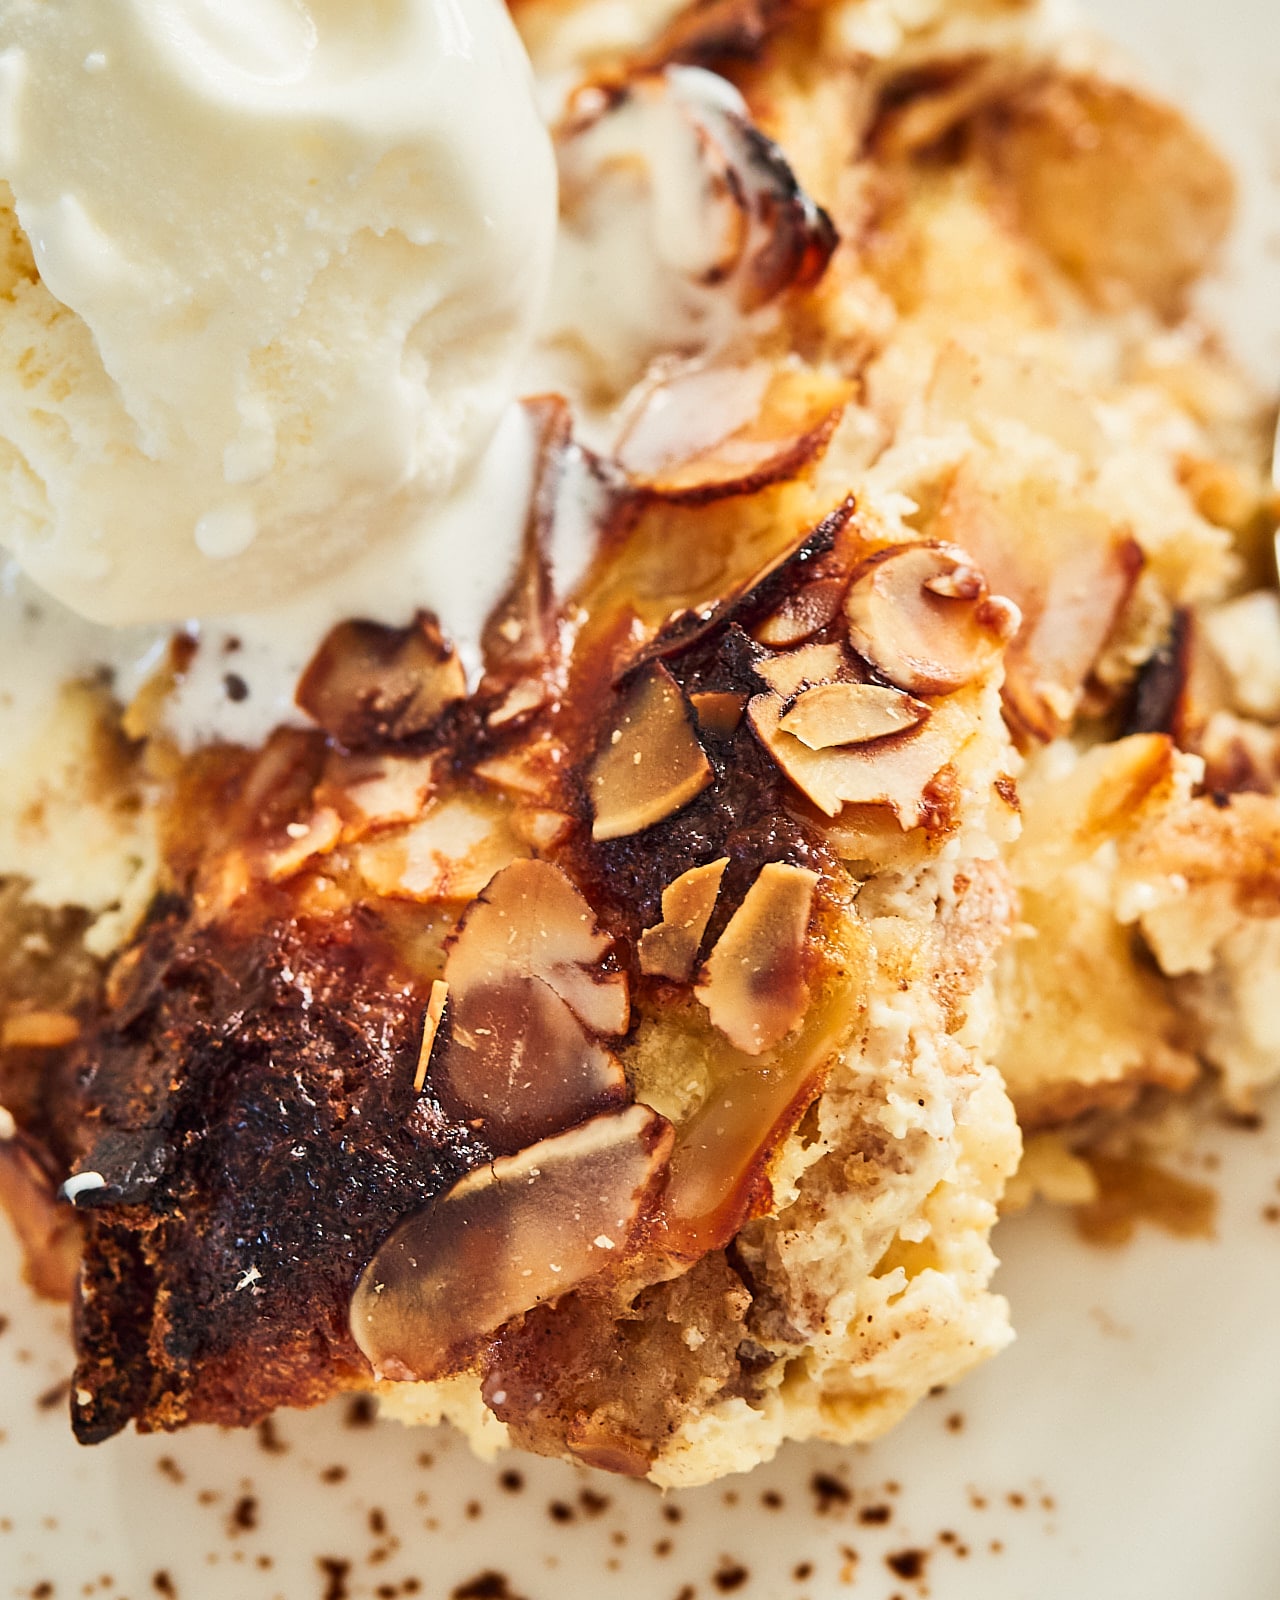 Cinnamon Apple Casserole is nothing more delightful than a dish full of aromas and Christmas feelings.